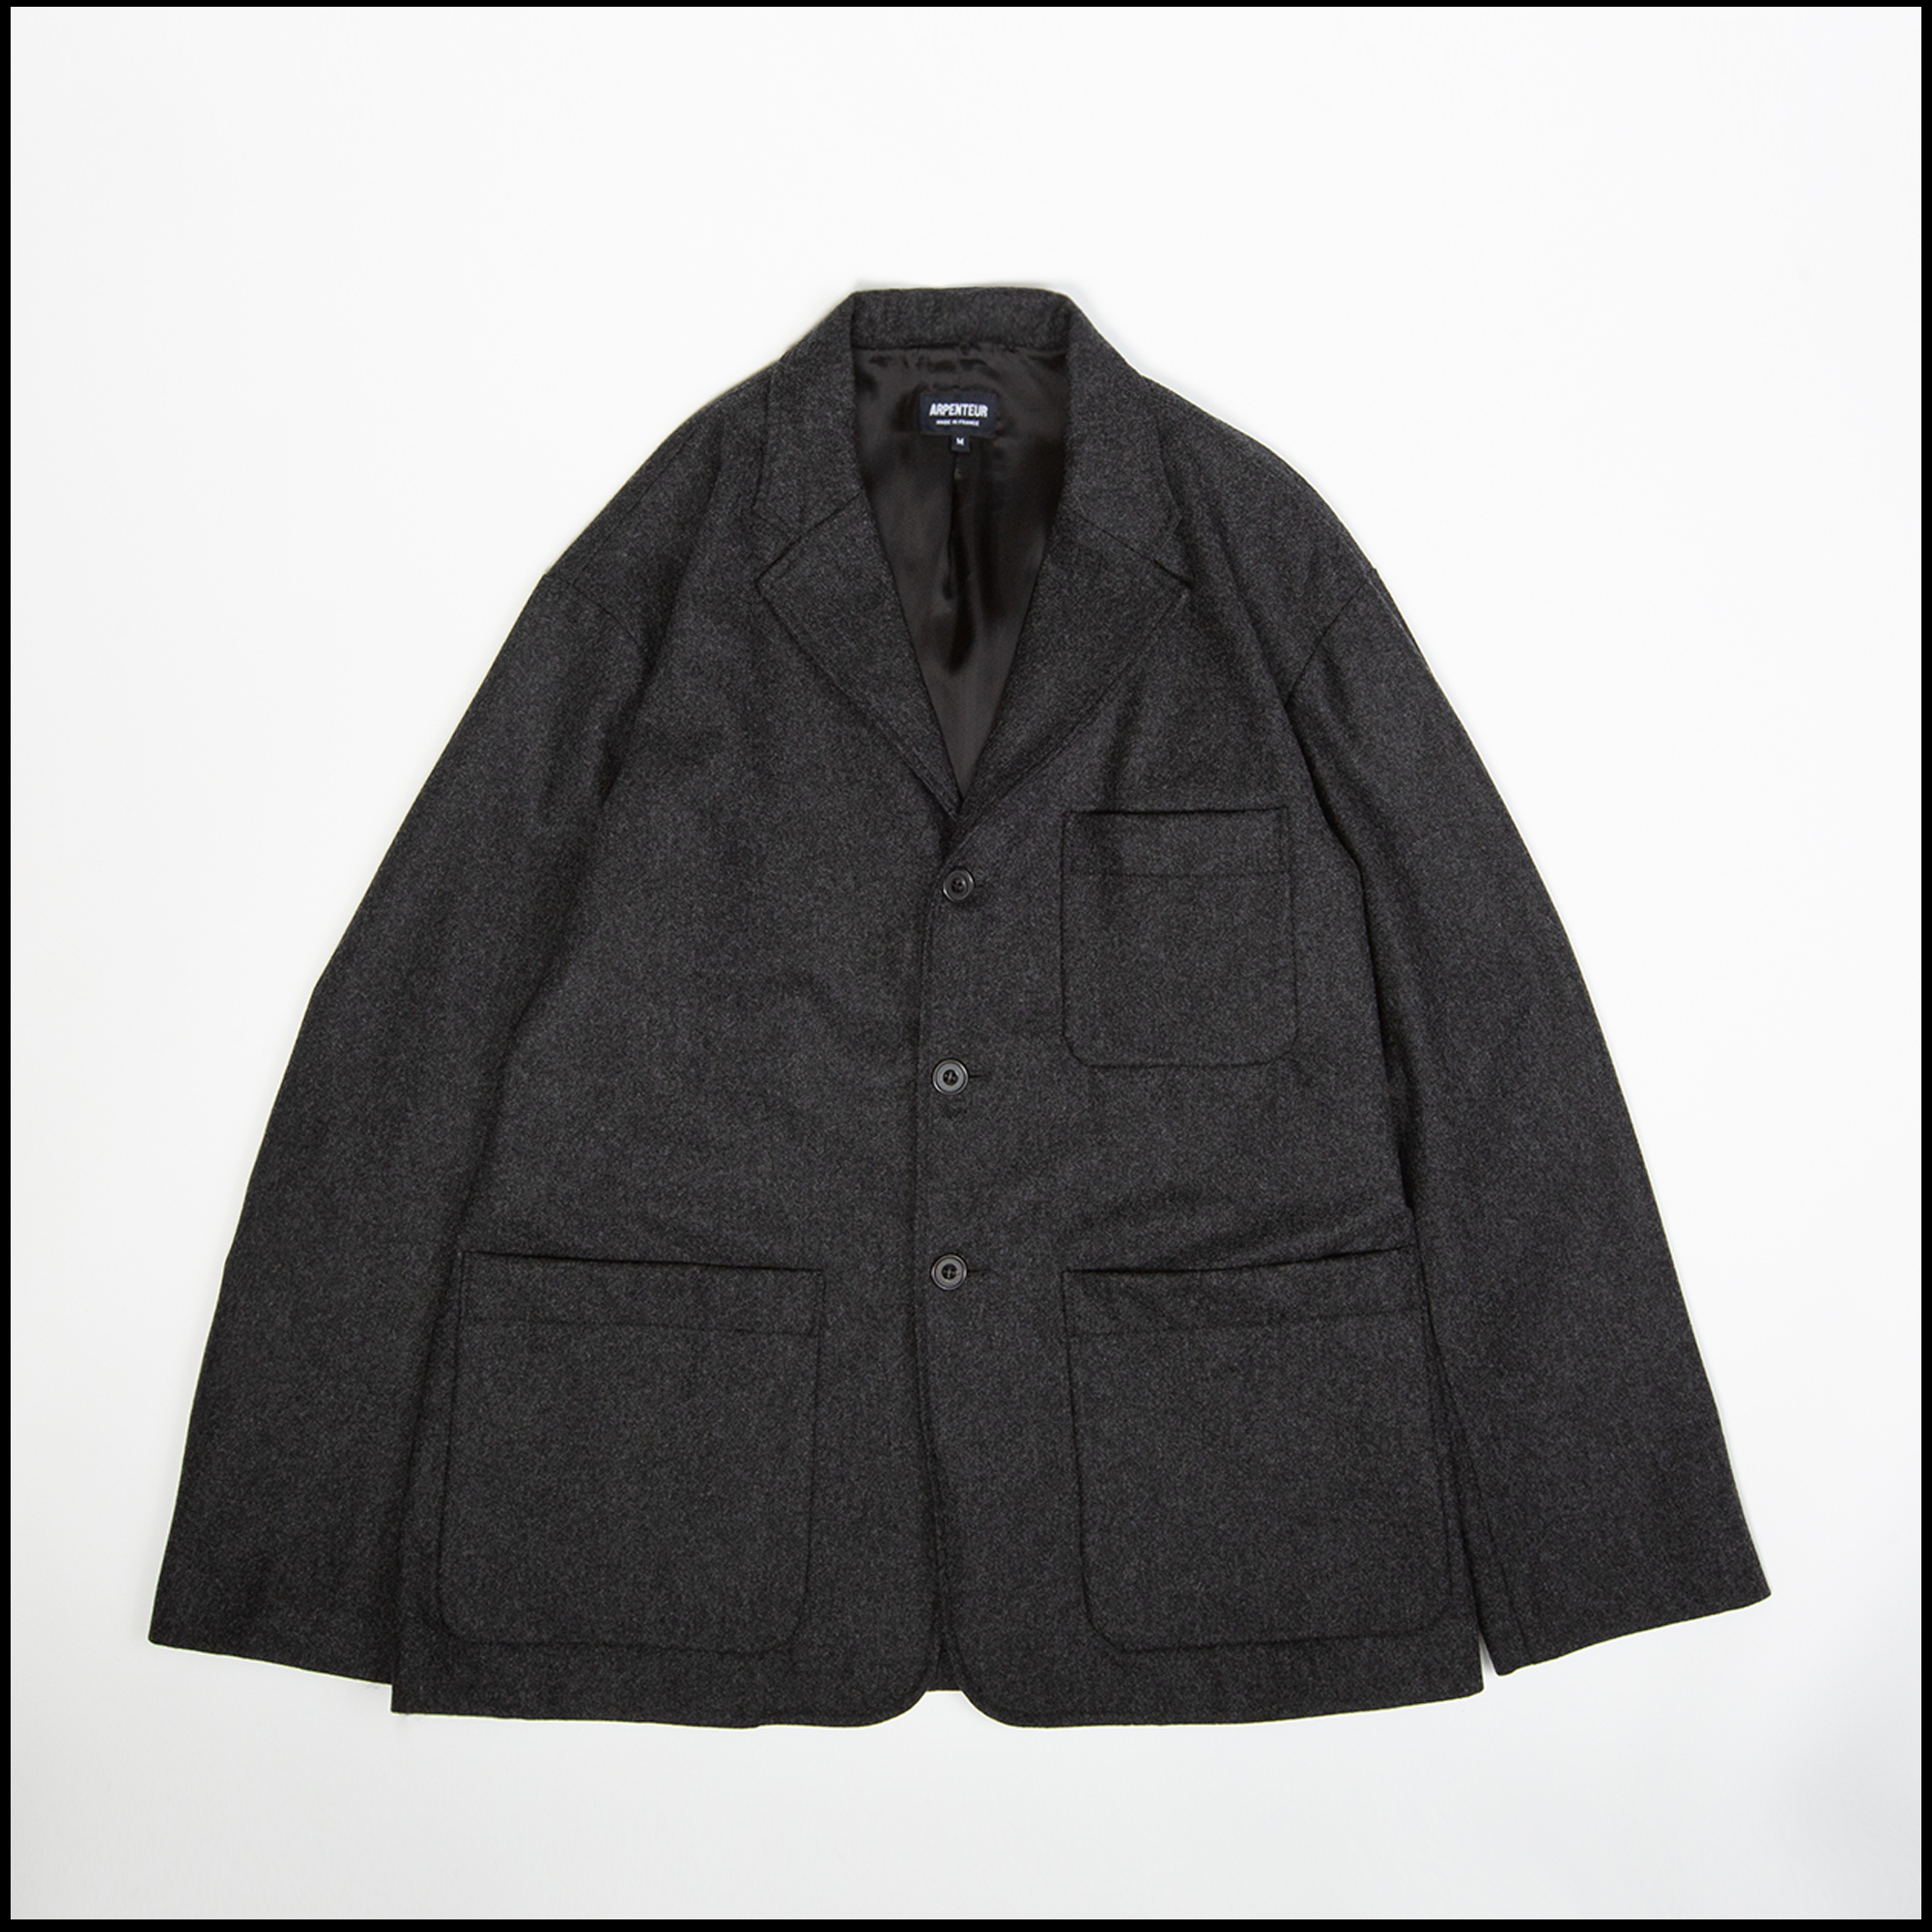 FOX Jacket in Charcoal color by Arpenteur